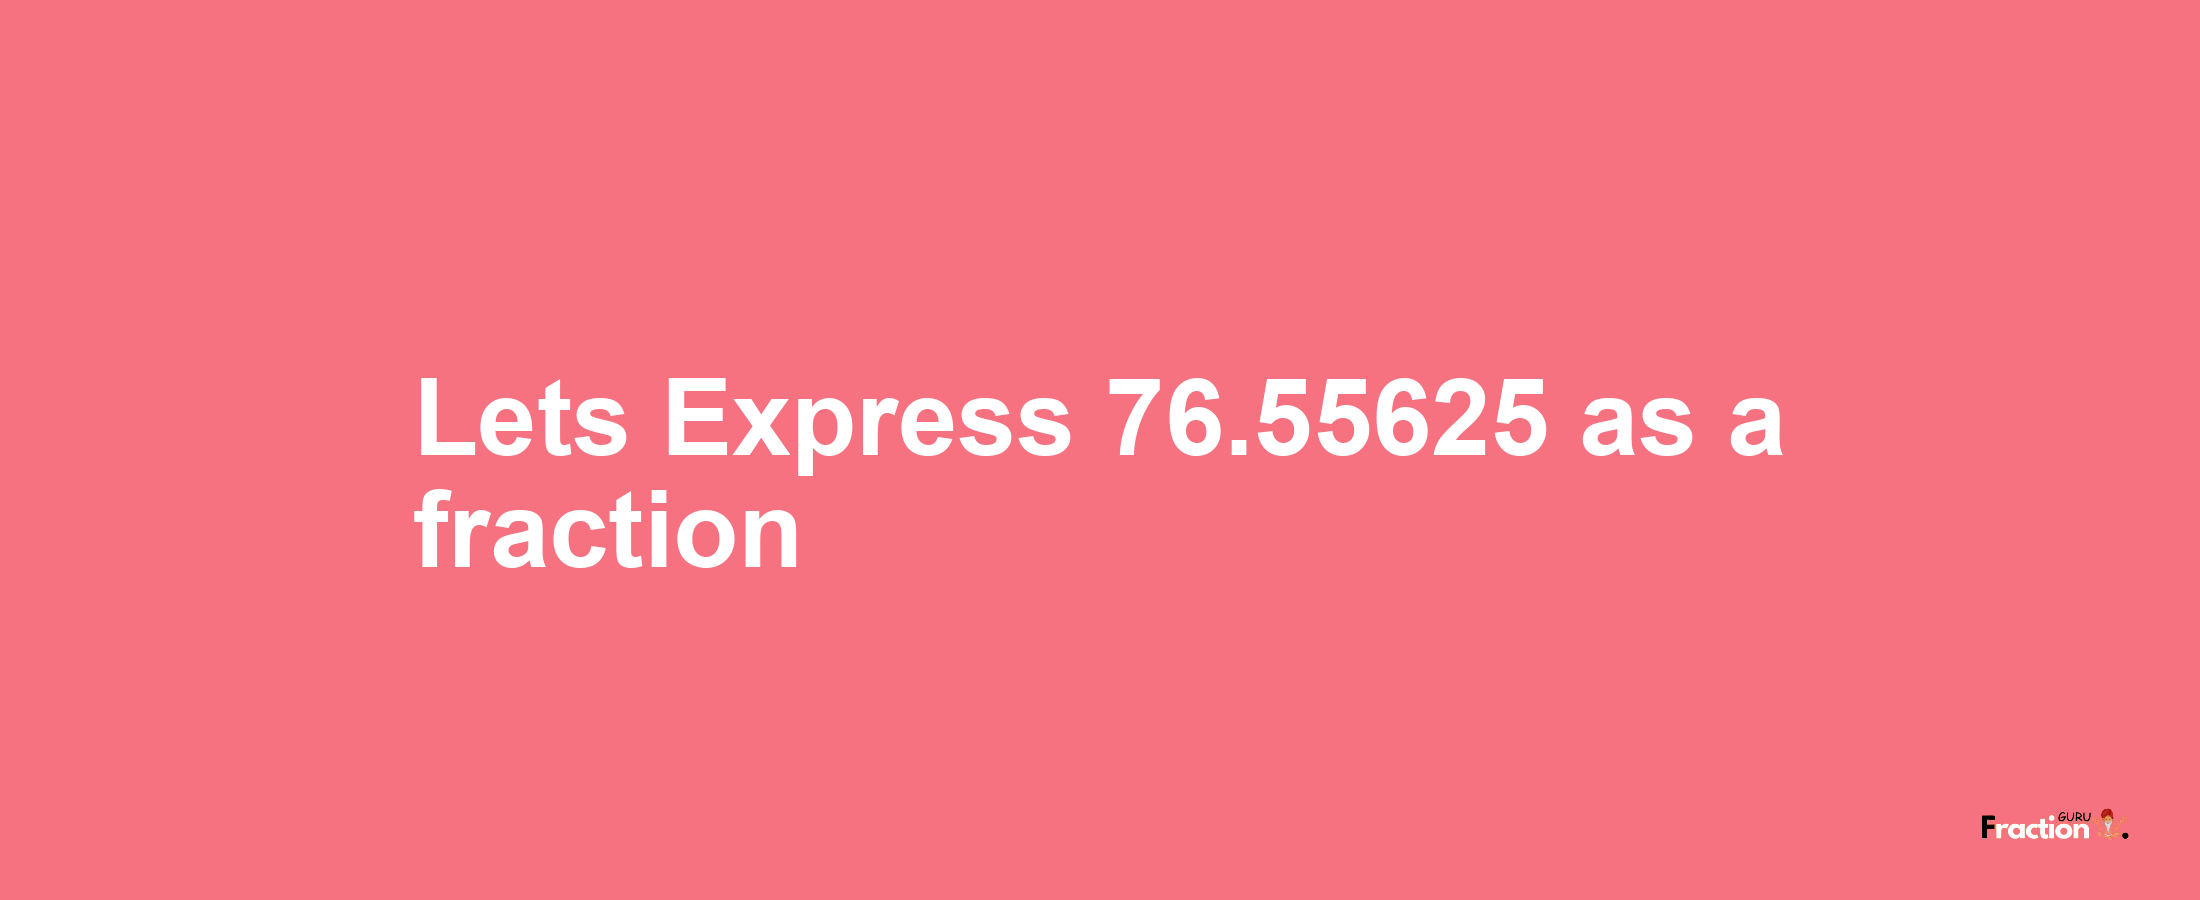 Lets Express 76.55625 as afraction